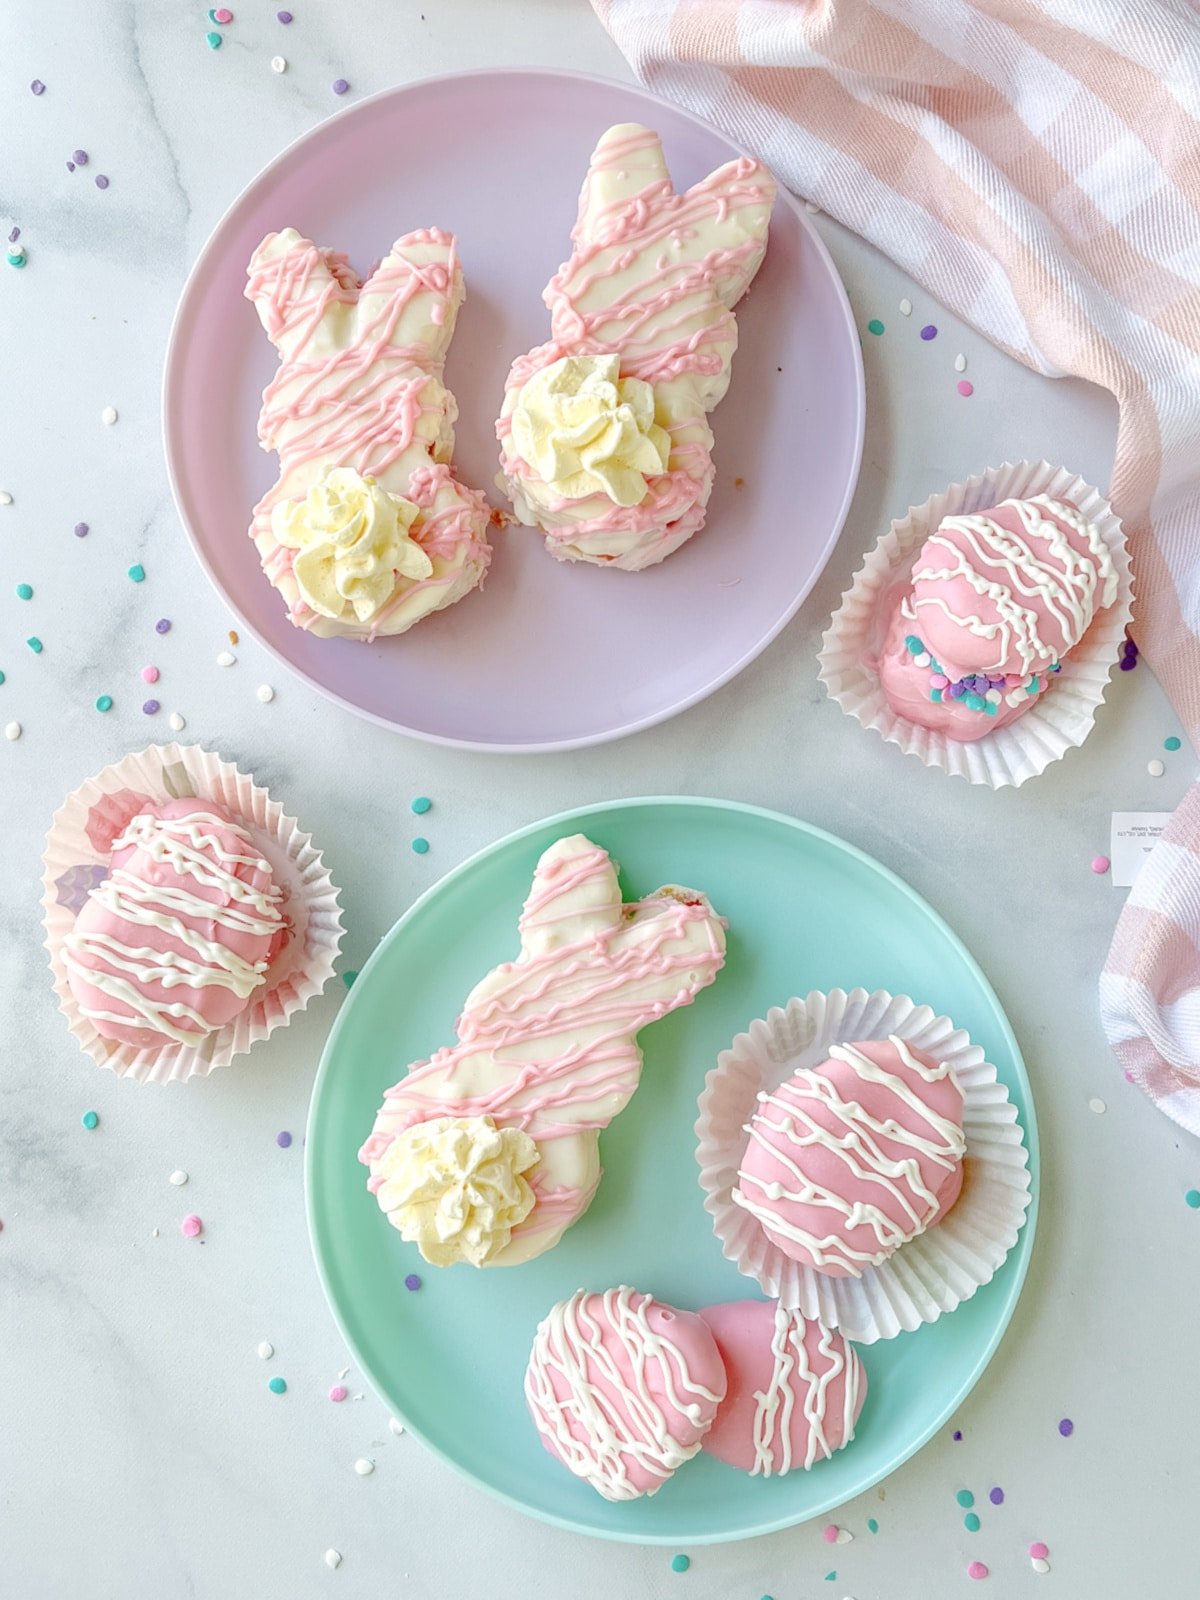 Bunny and Easter Egg Cakes